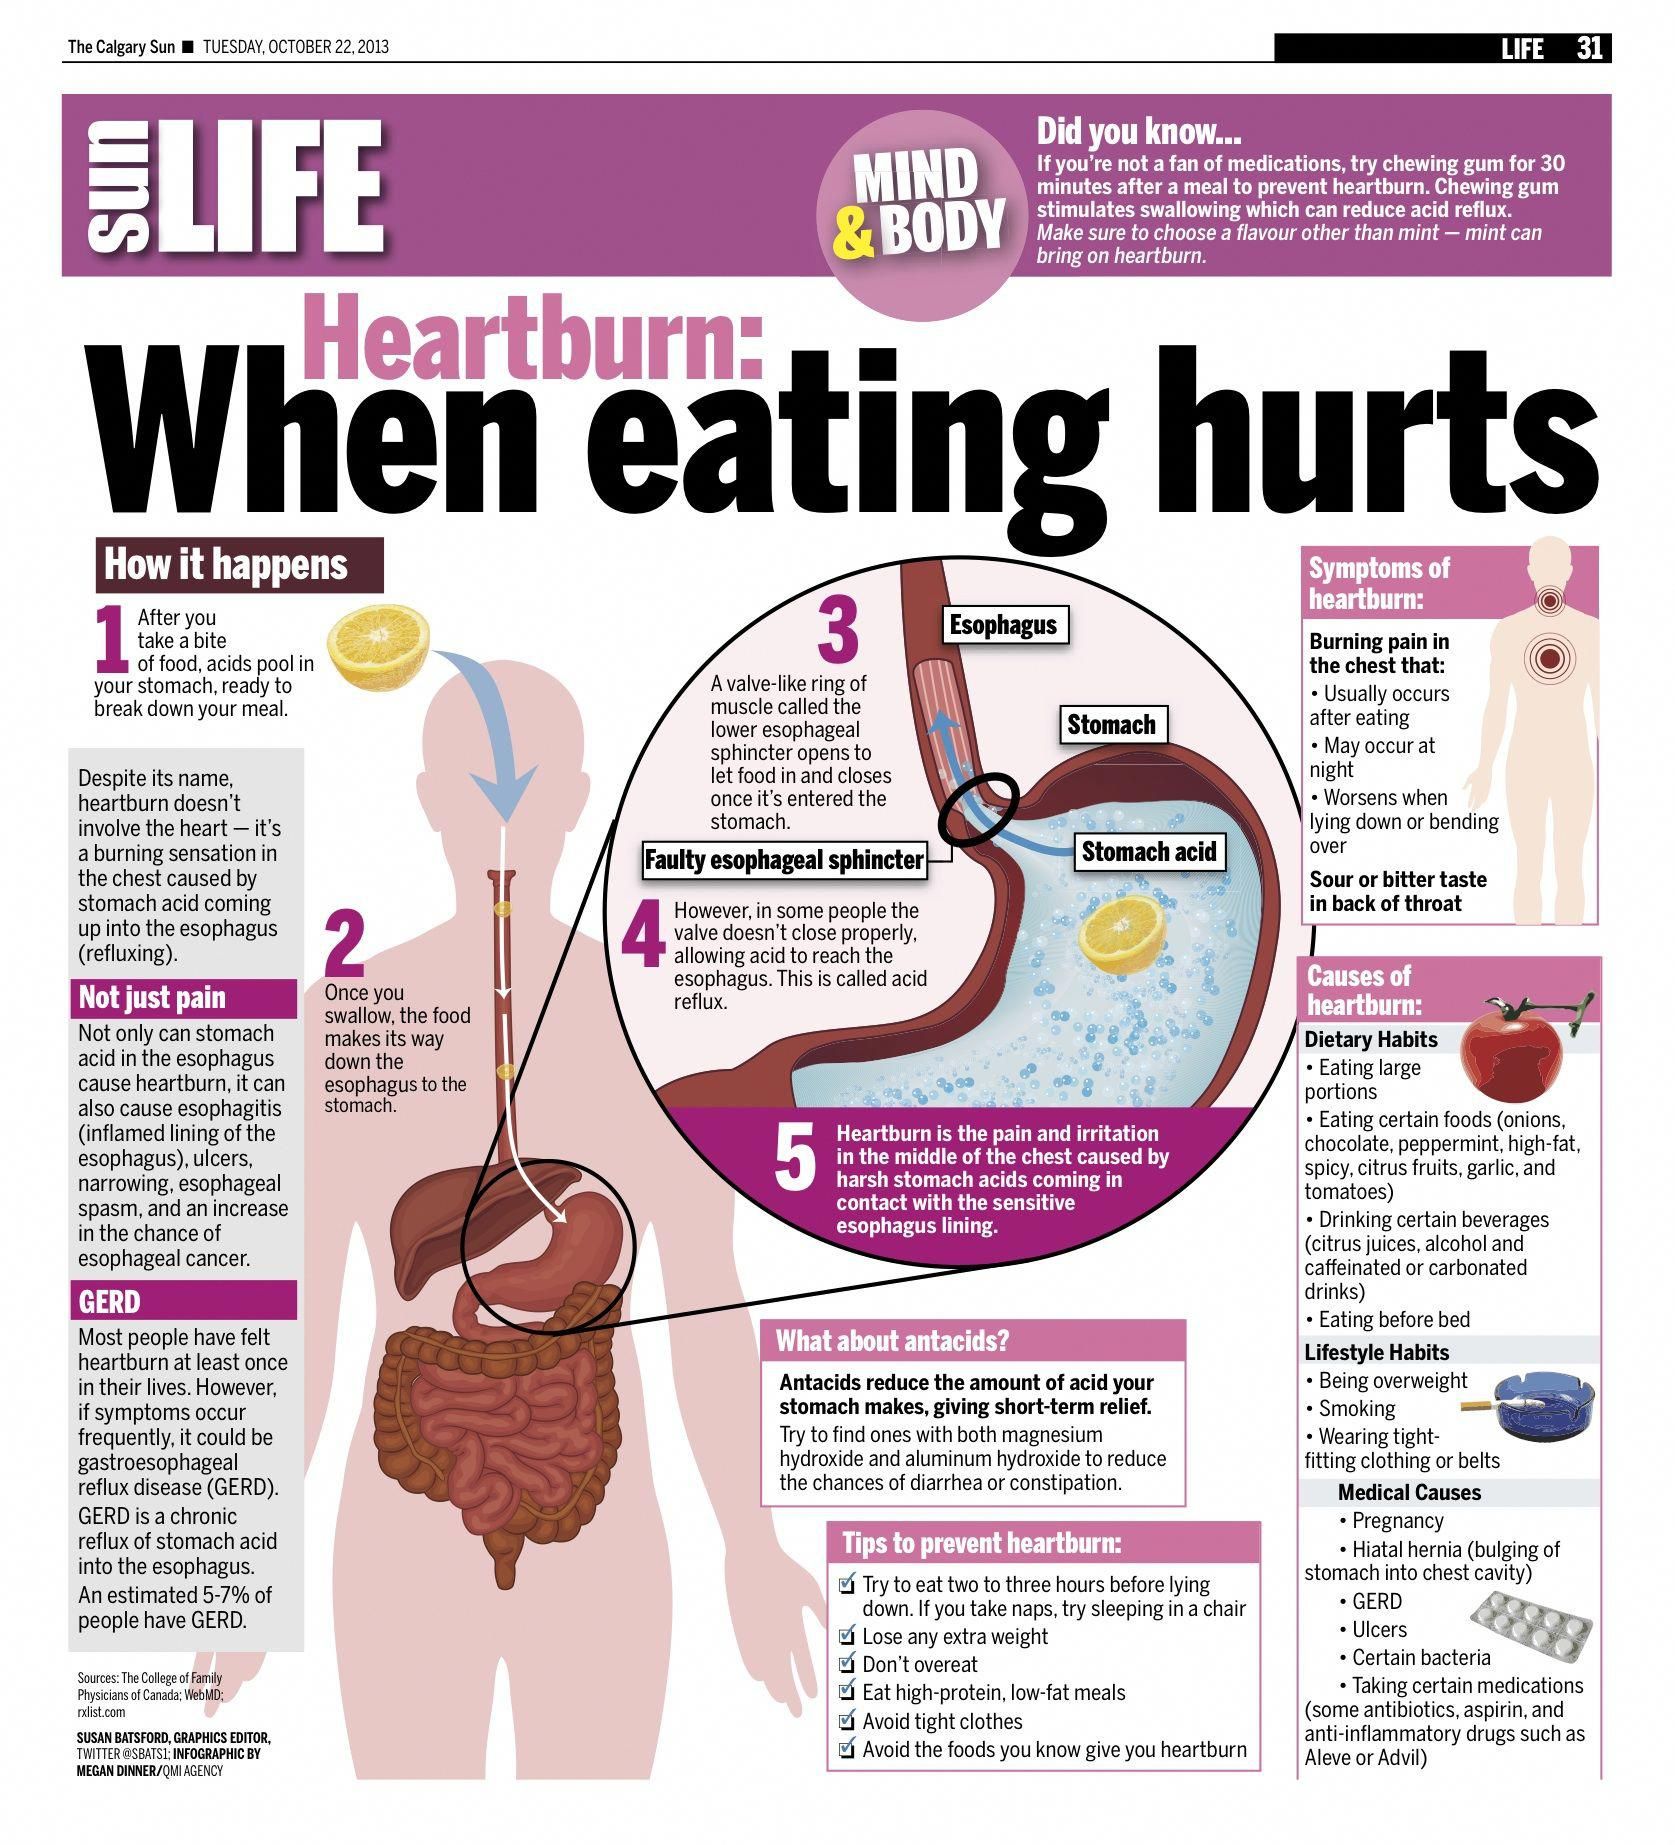 Pin on the pain of heartburn and acid reflux